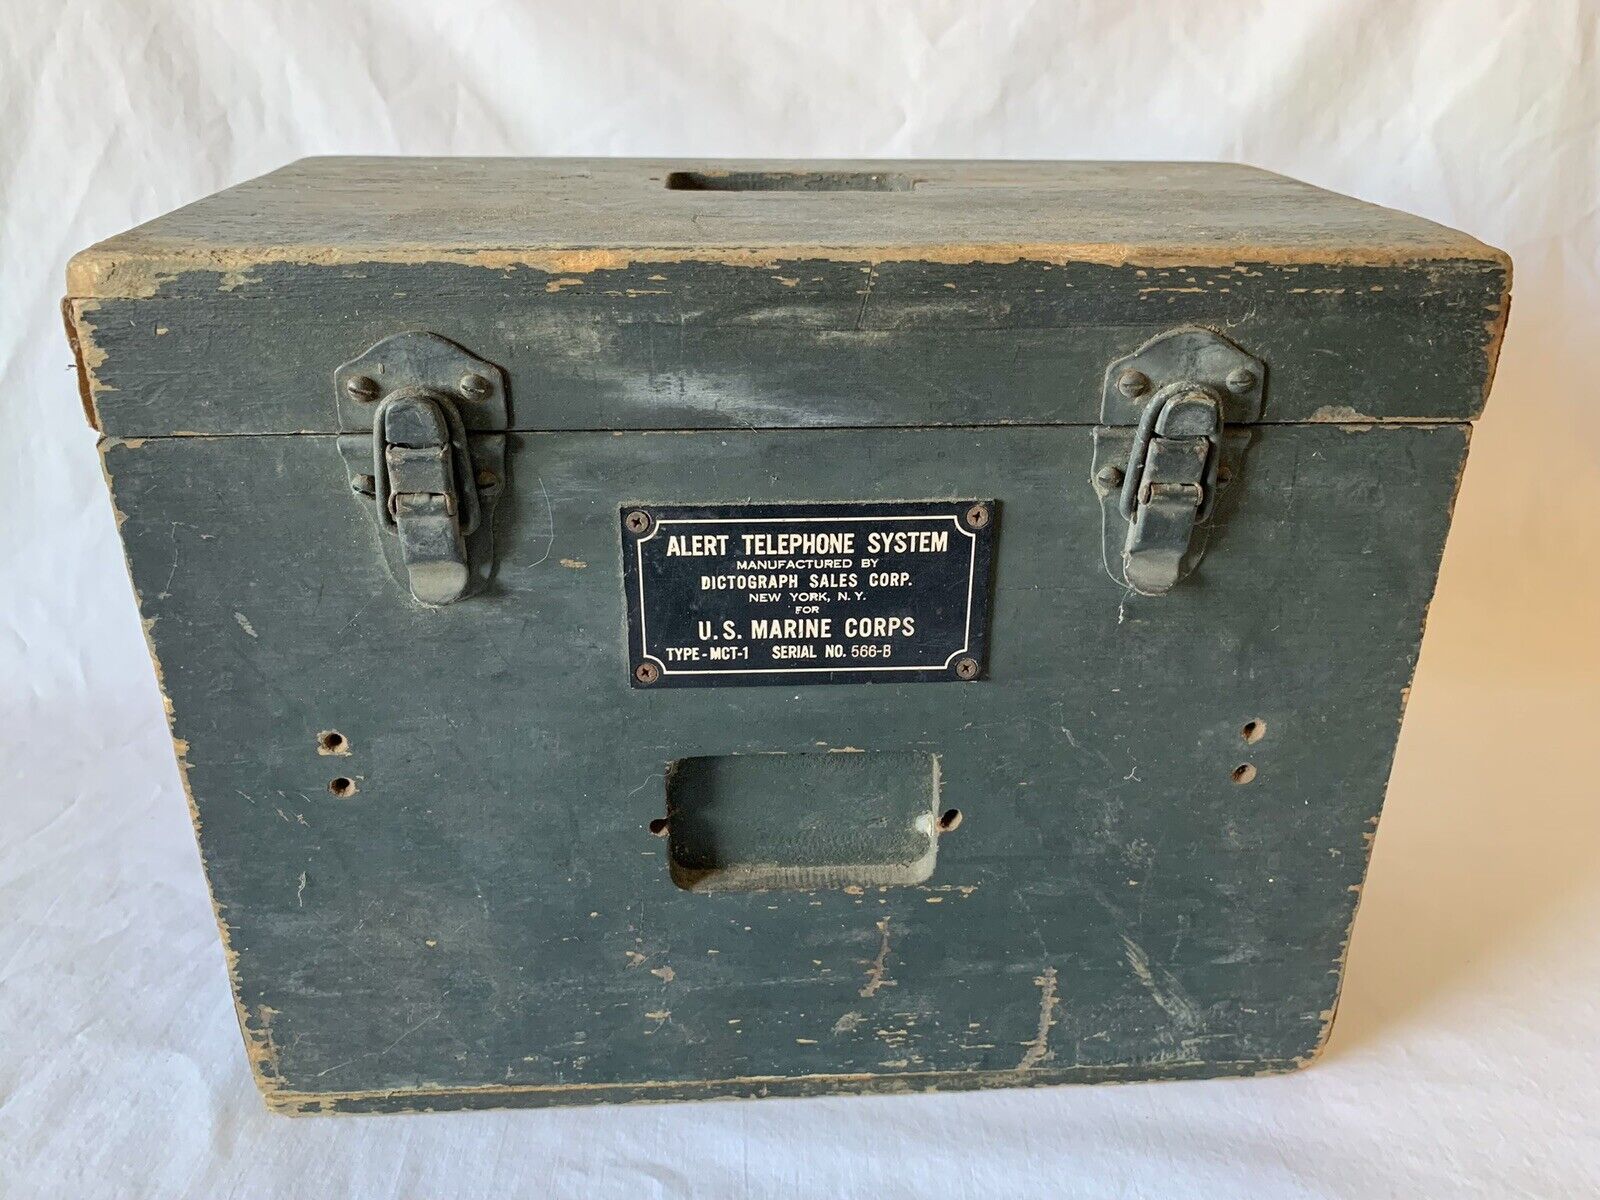 Alert Telephone System Box US Marine Corps Dictograph Sales Corp Vintage Crate